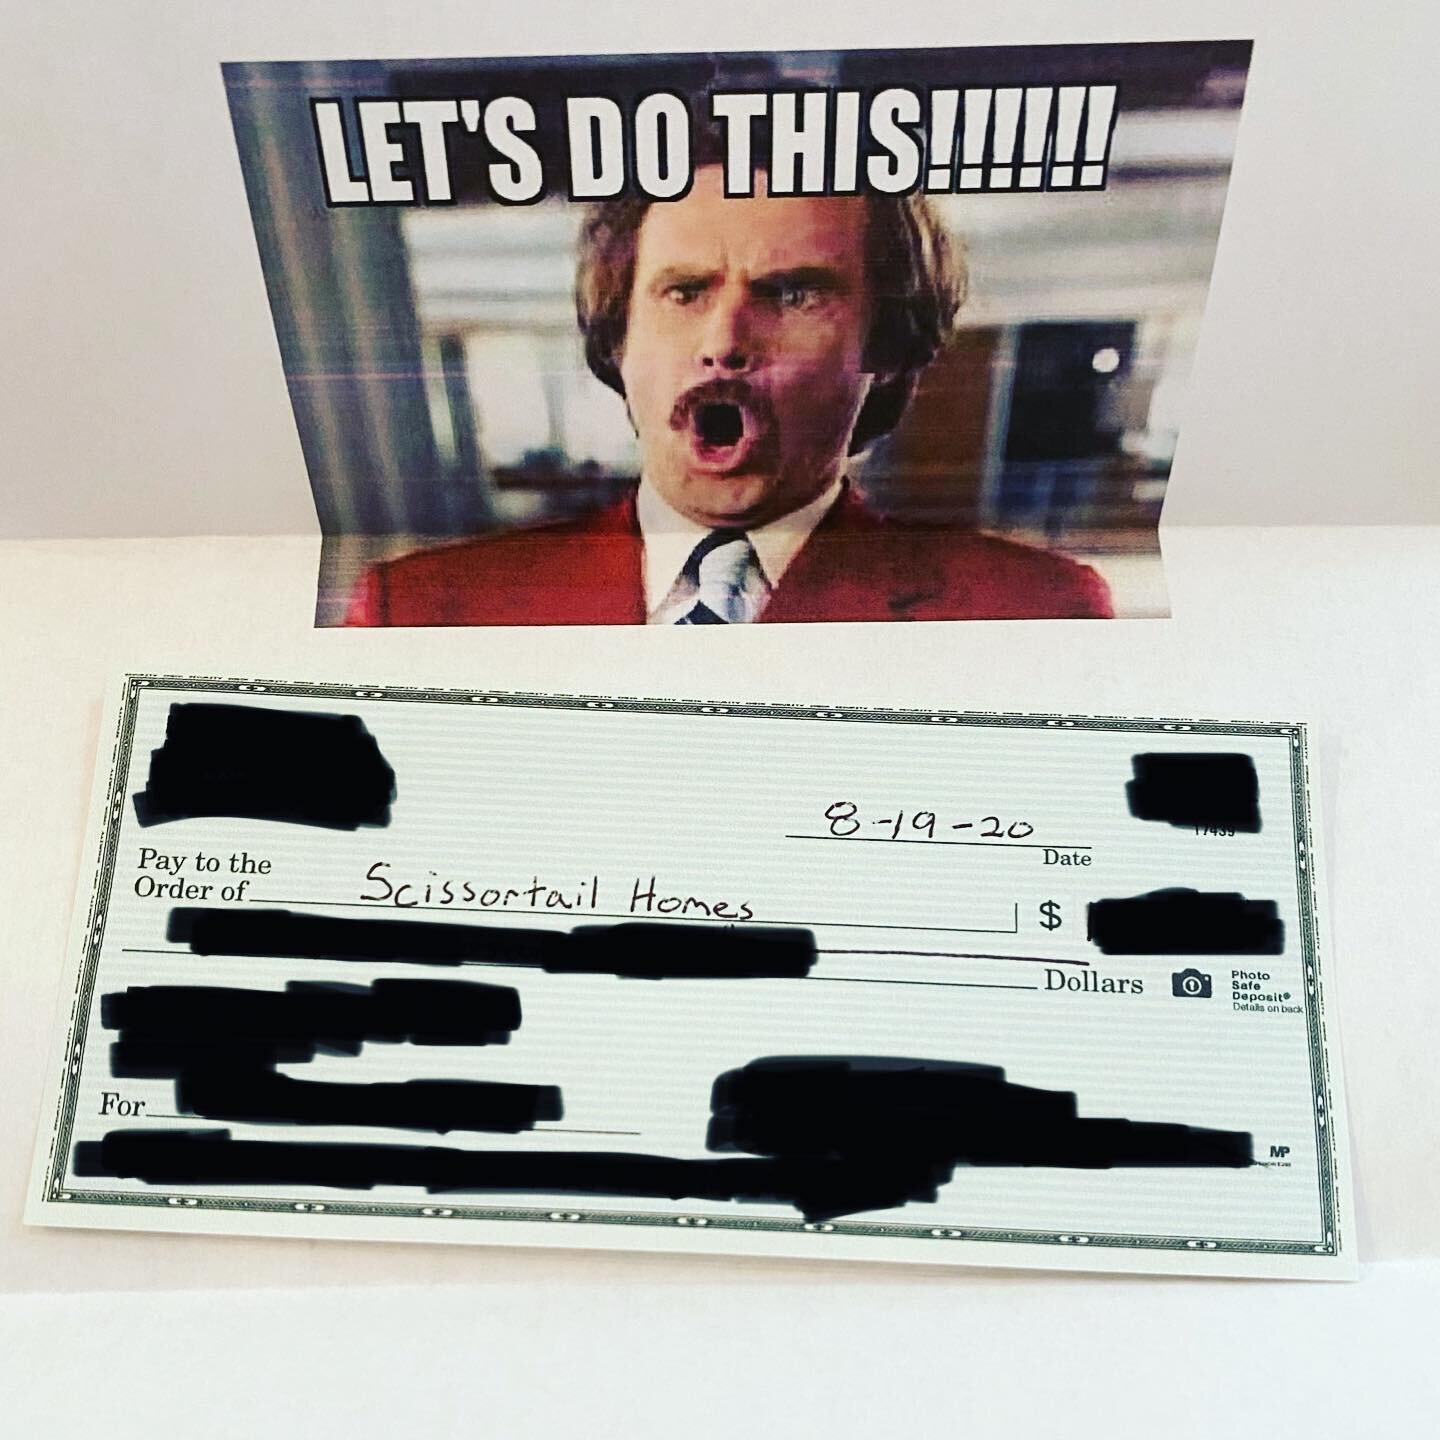 When your newest custom home client mails their first deposit check wrapped in this.  Day. Made. 😂🙌🏼

#carltonlanding #scissortailhomes #bestclientsever #homebuildingisfun #buildersofinstagram